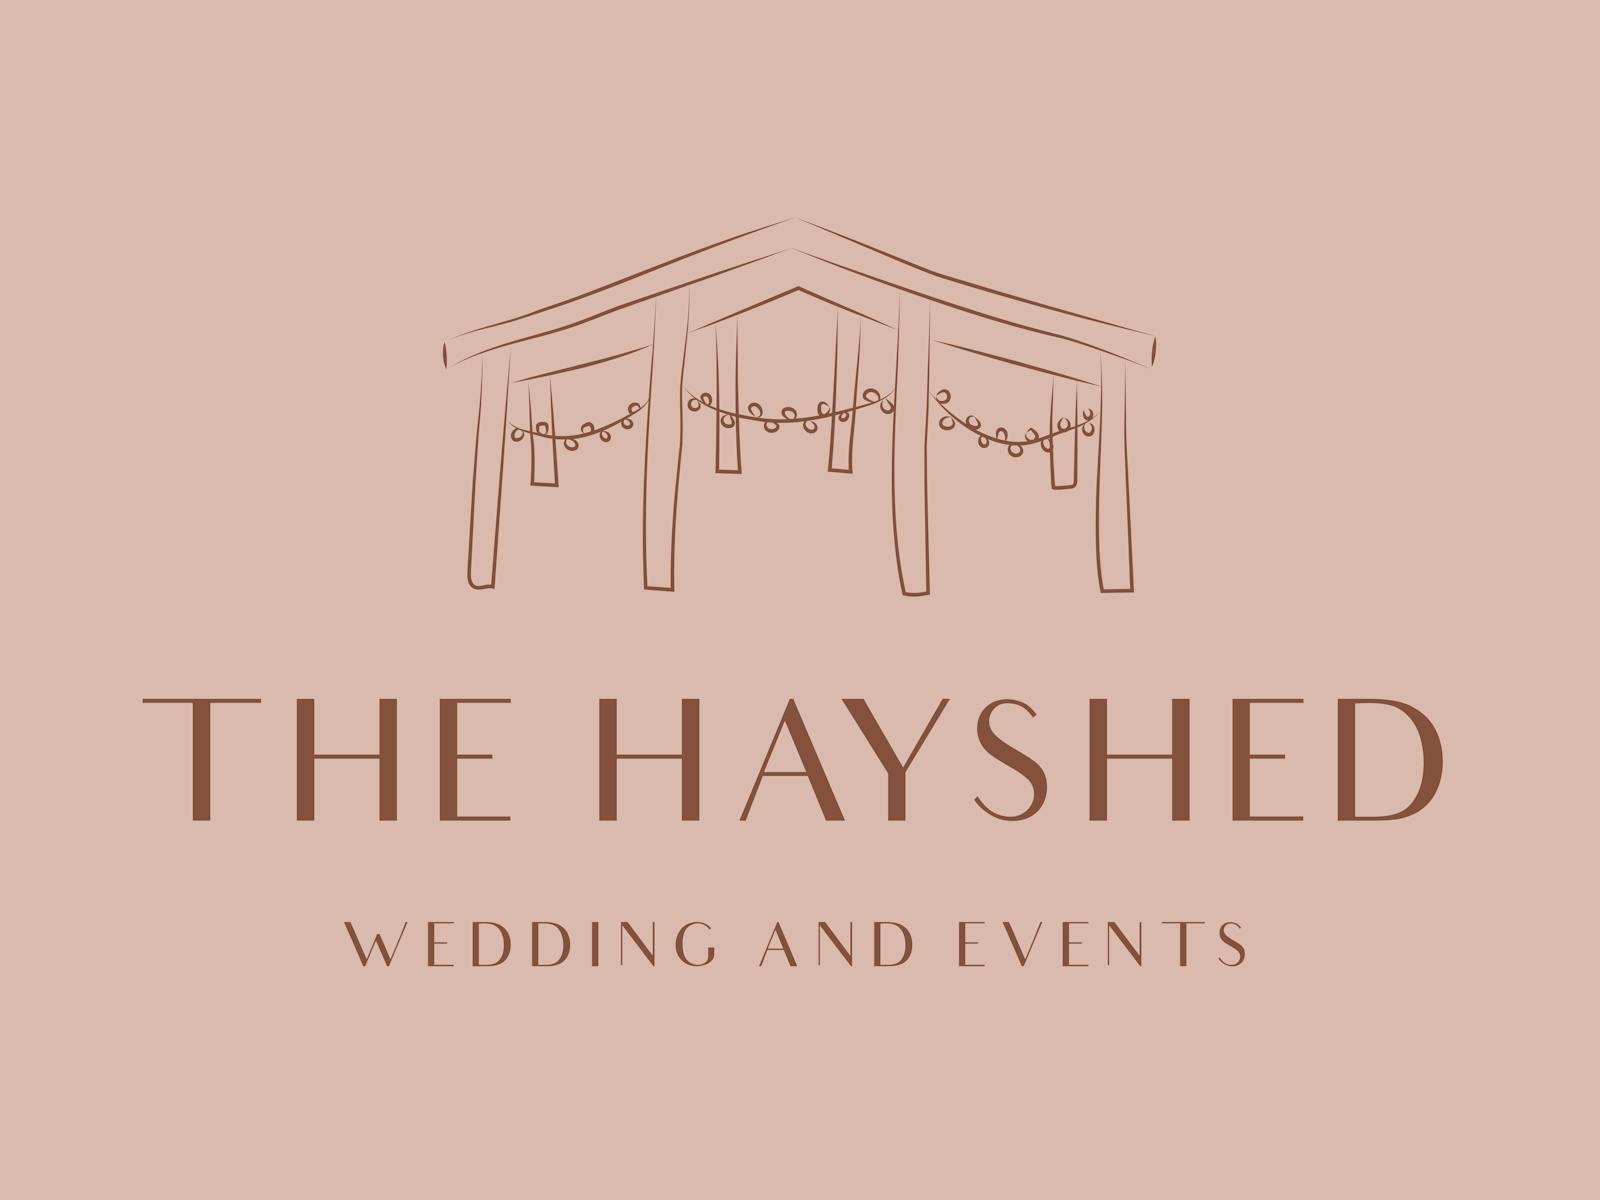 Image for The Hayshed Wedding and Events